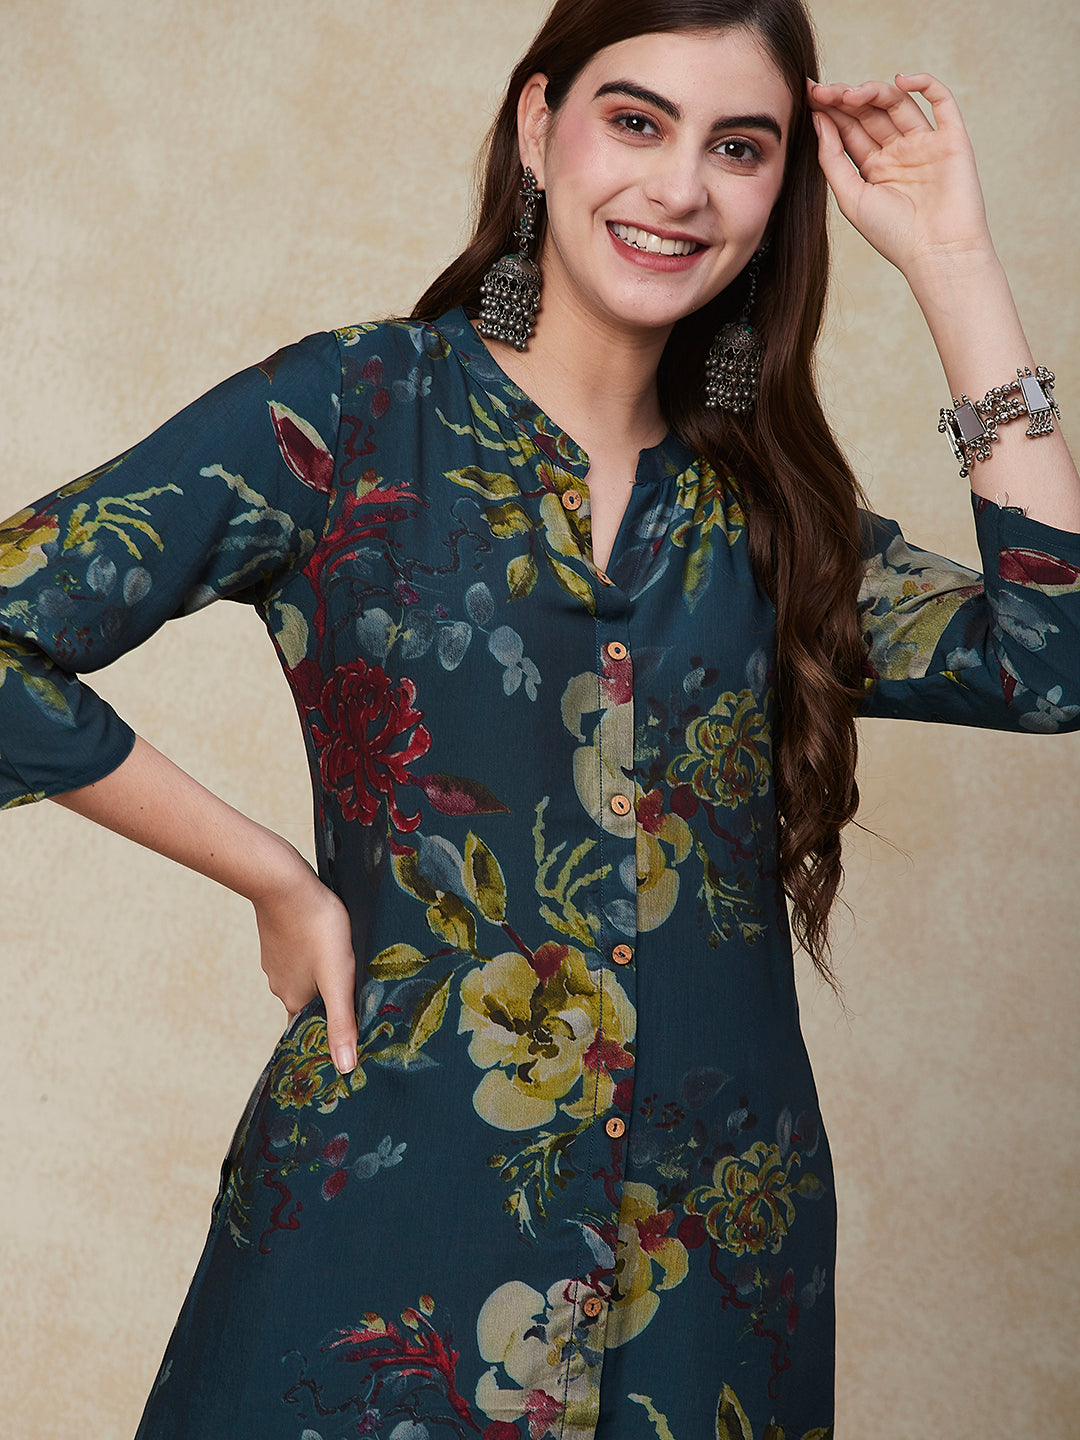 Floral Printed Wooden Buttoned A-line Kurta - Green